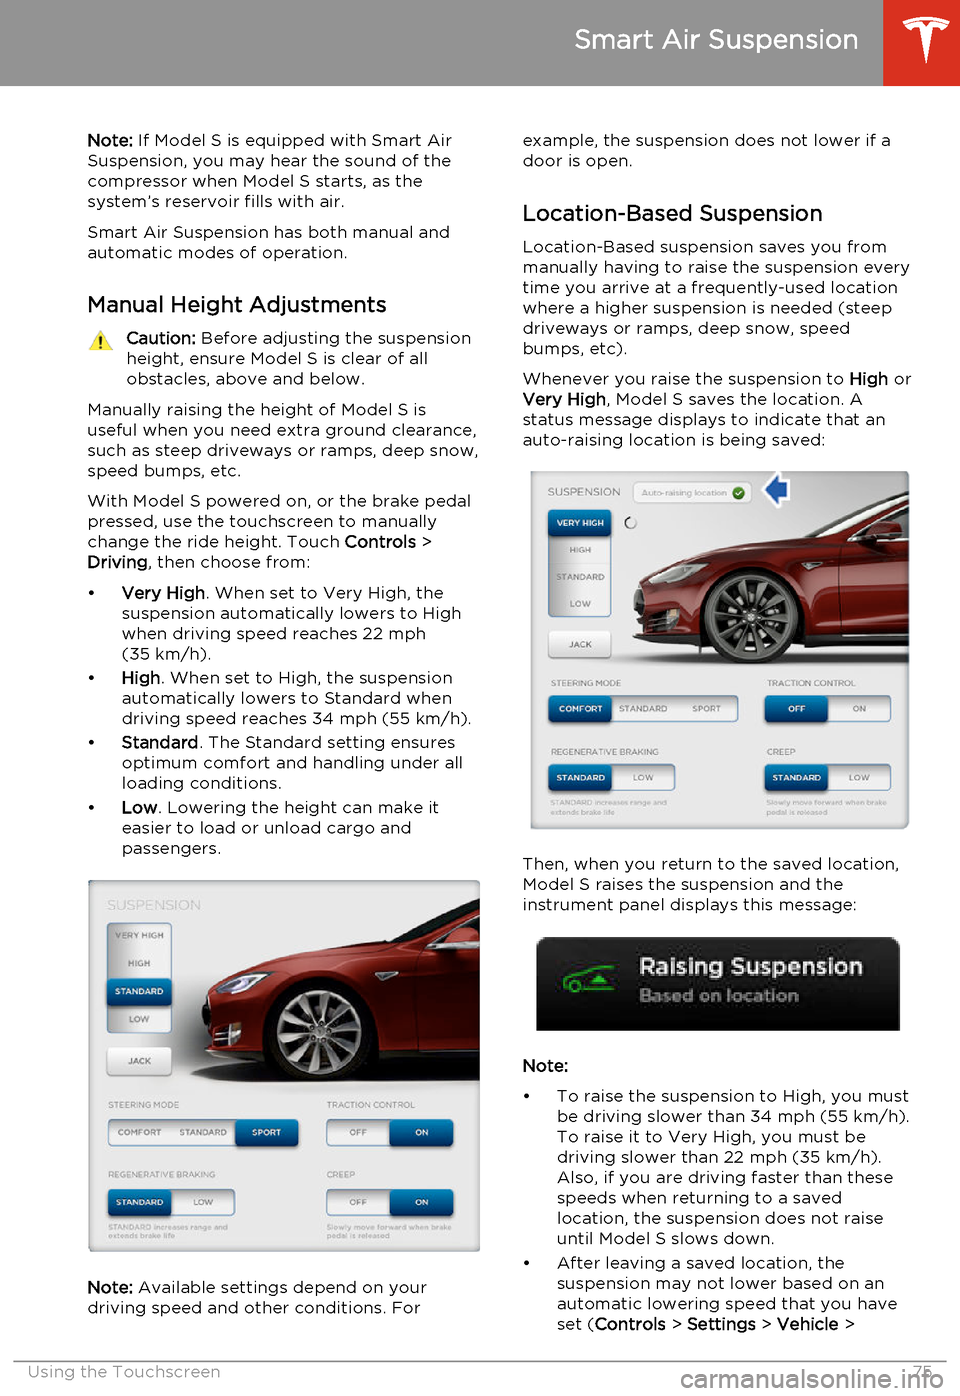 TESLA MODEL S 2014  Owners manual (North America) Note: If Model S is equipped with Smart Air
Suspension, you may hear the sound of the compressor when Model S starts, as thesystem’s reservoir fills with air.
Smart Air Suspension has both manual an